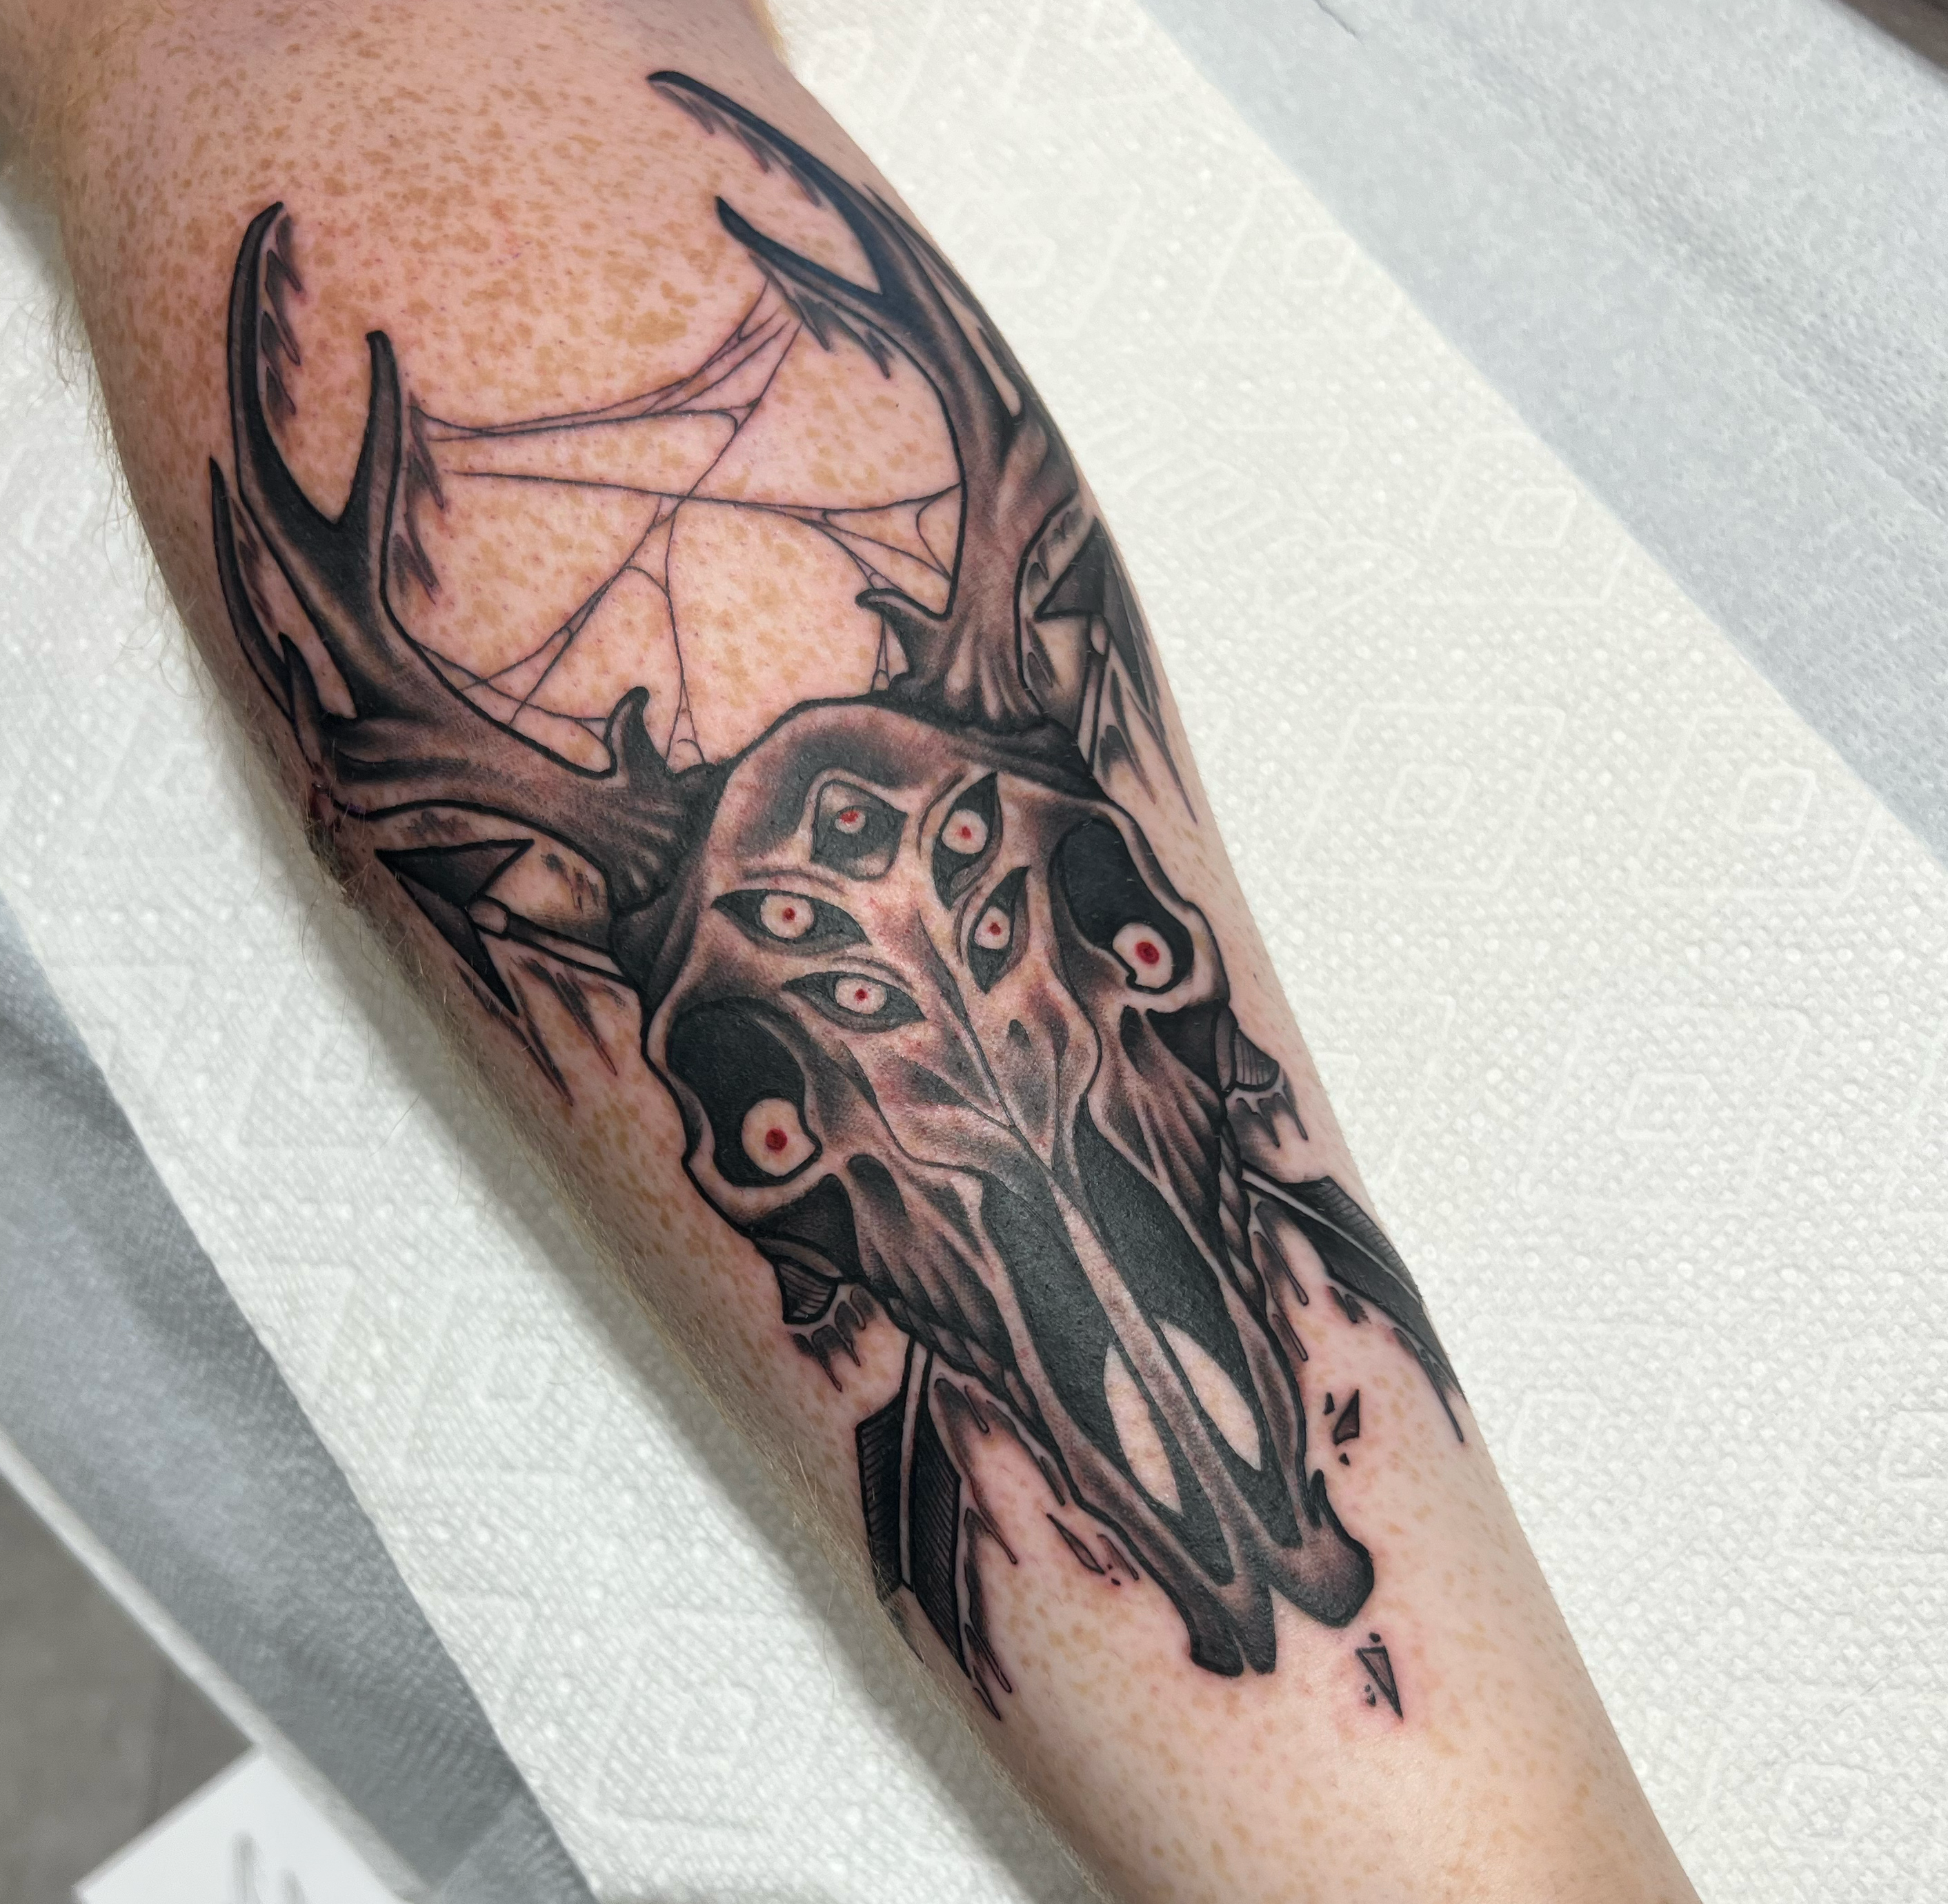 101 Best Deer Skull Tattoo Ideas You'll Have To See To Believe!